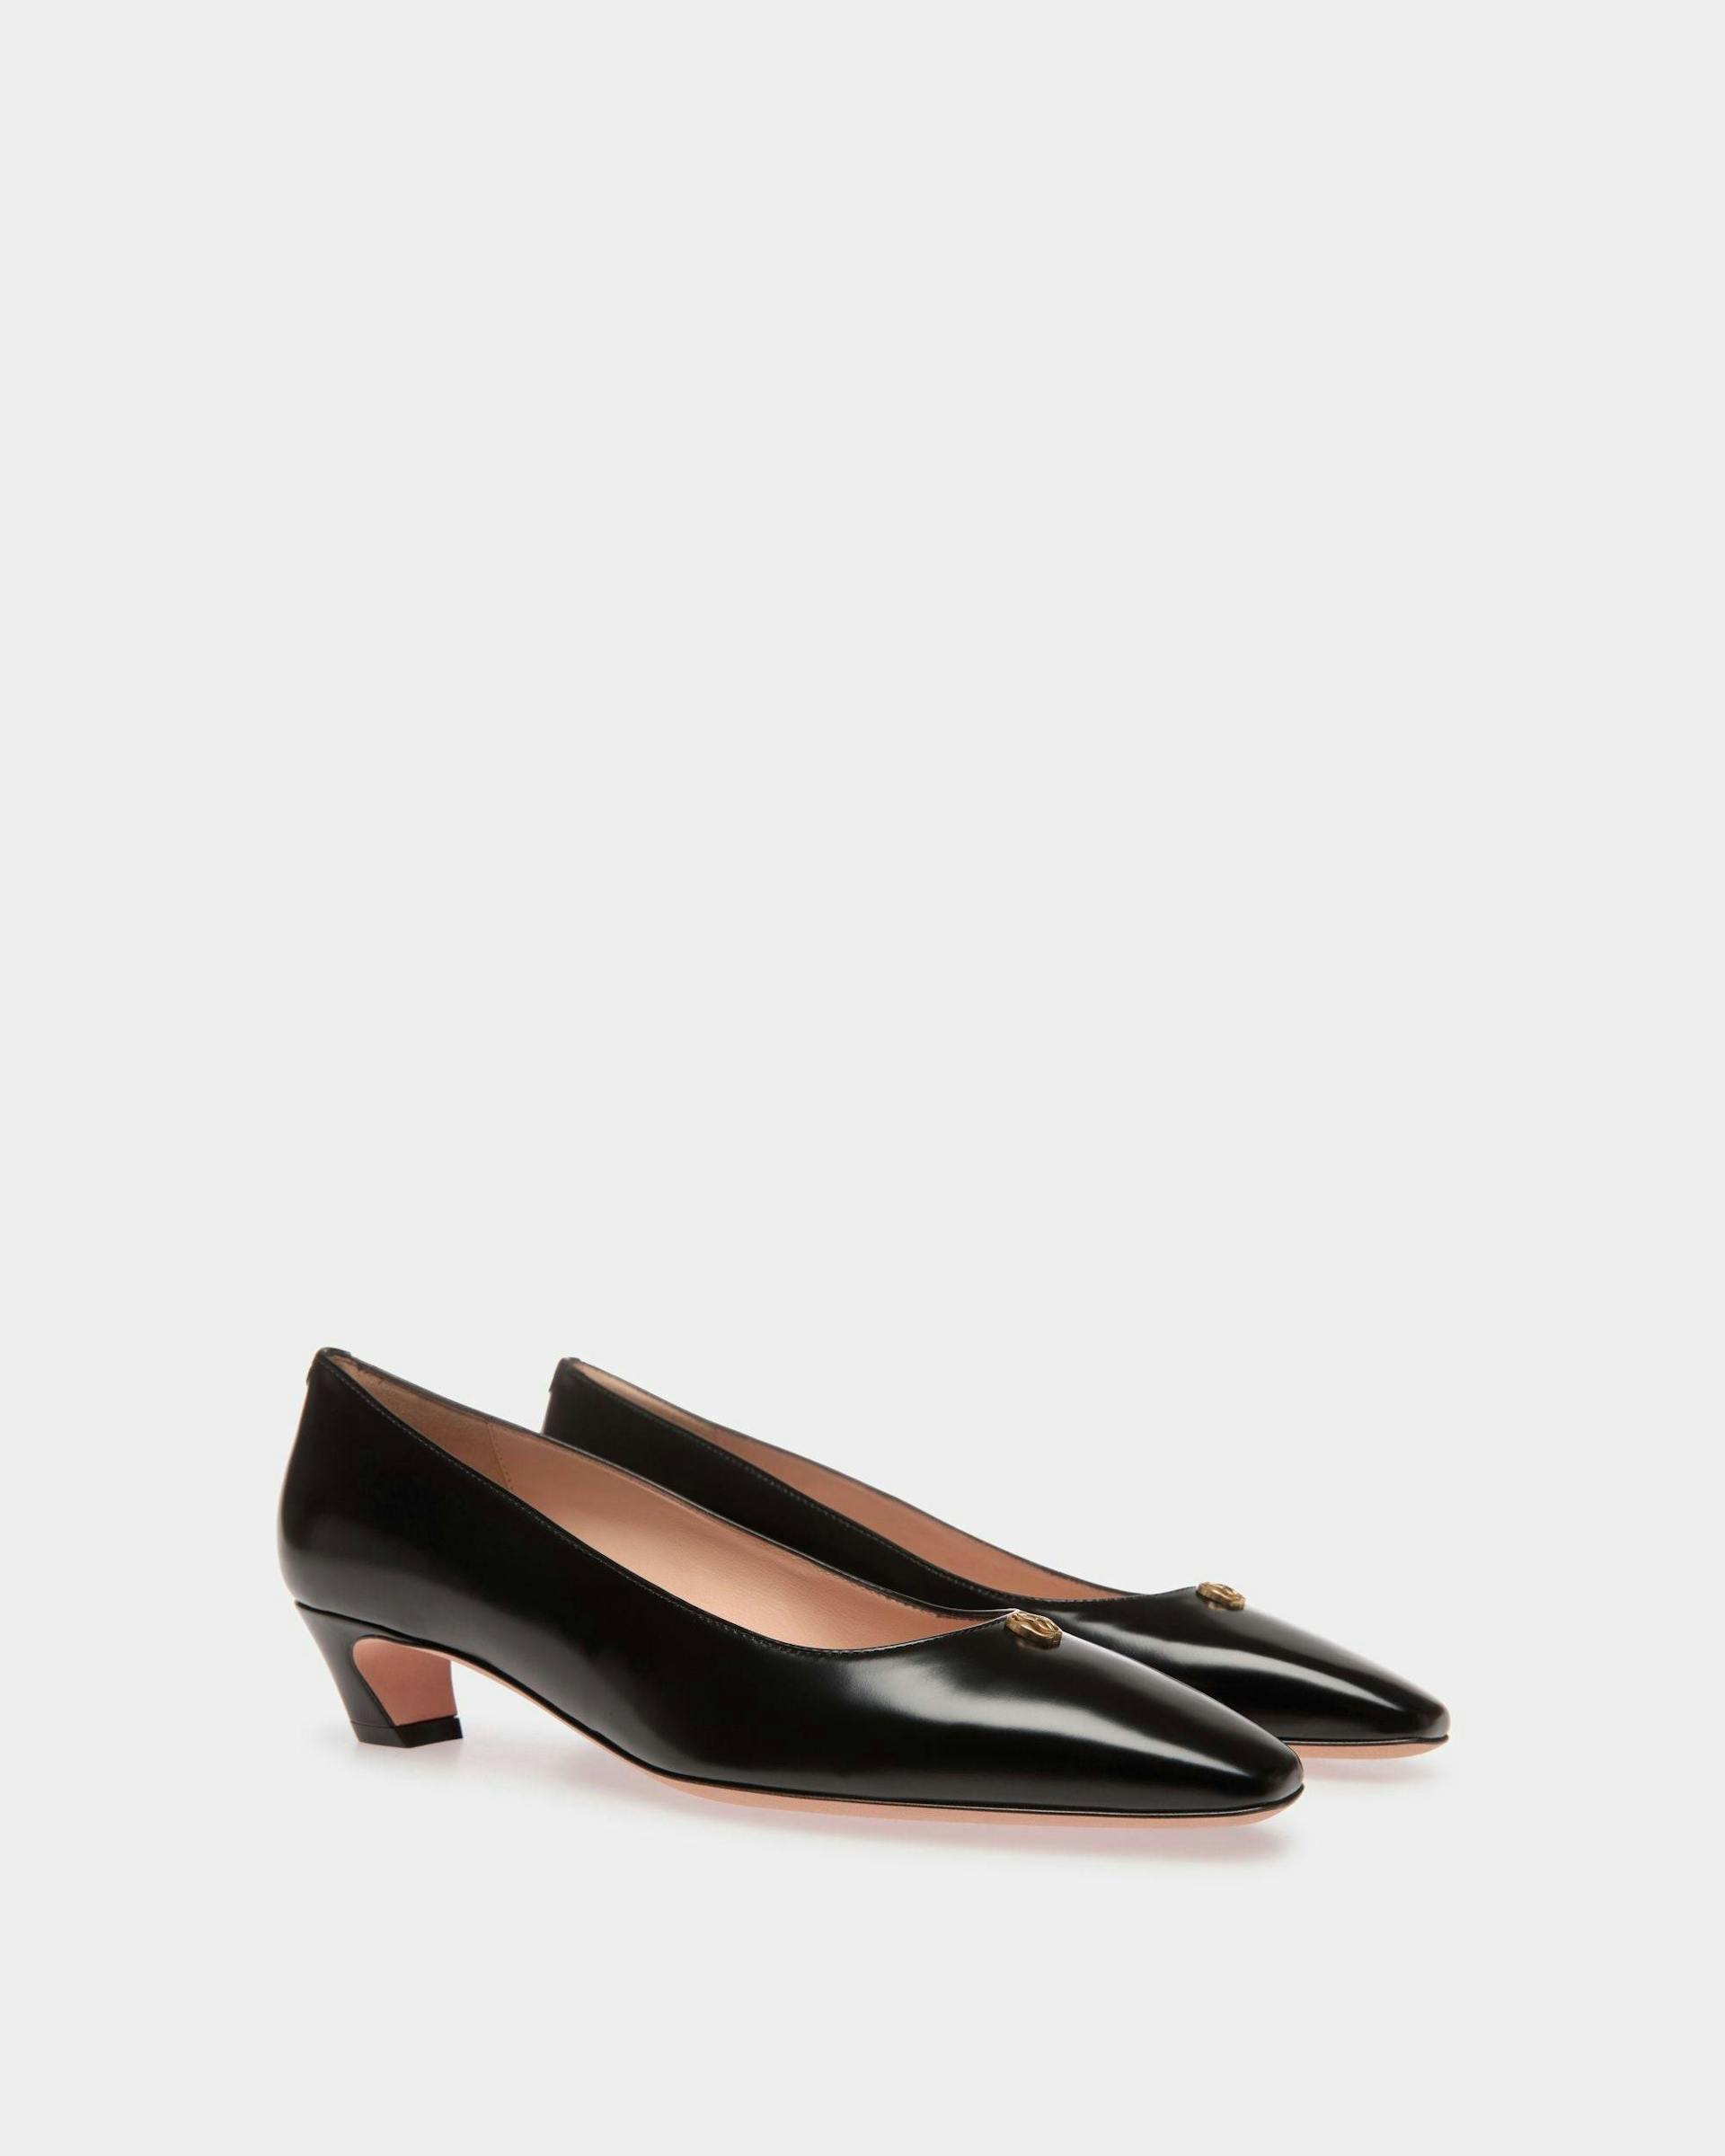 Women's Sylt Pump In Black Leather | Bally | Still Life 3/4 Front